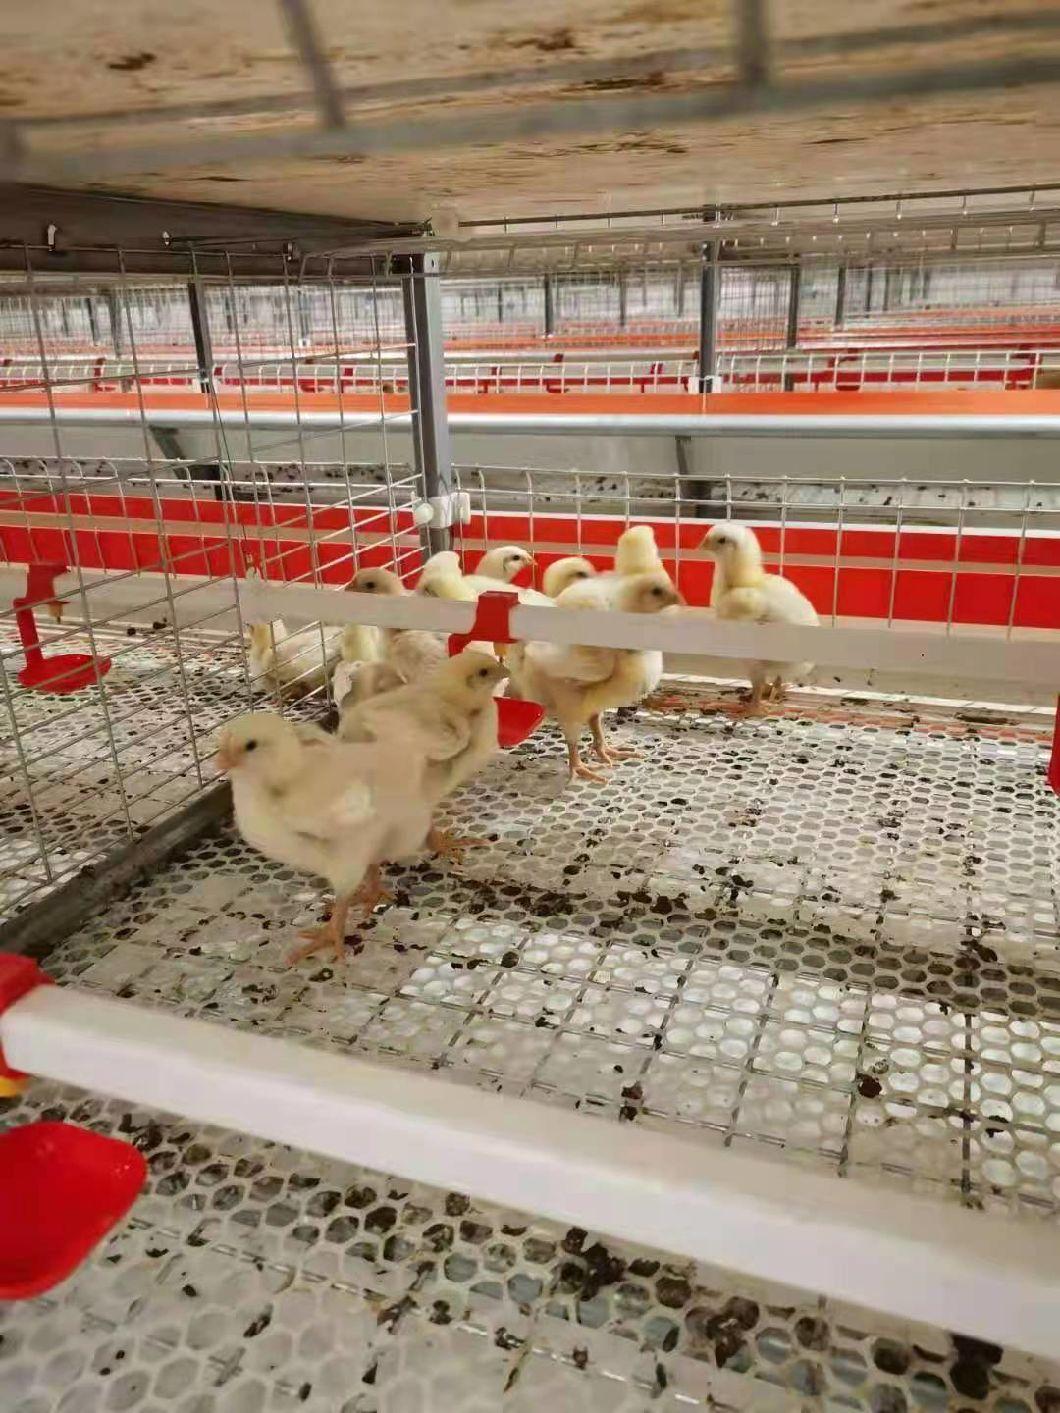 Cheap and High Quality Chicken Feeding and Drinking Layer Cage Used in Poultry Farm